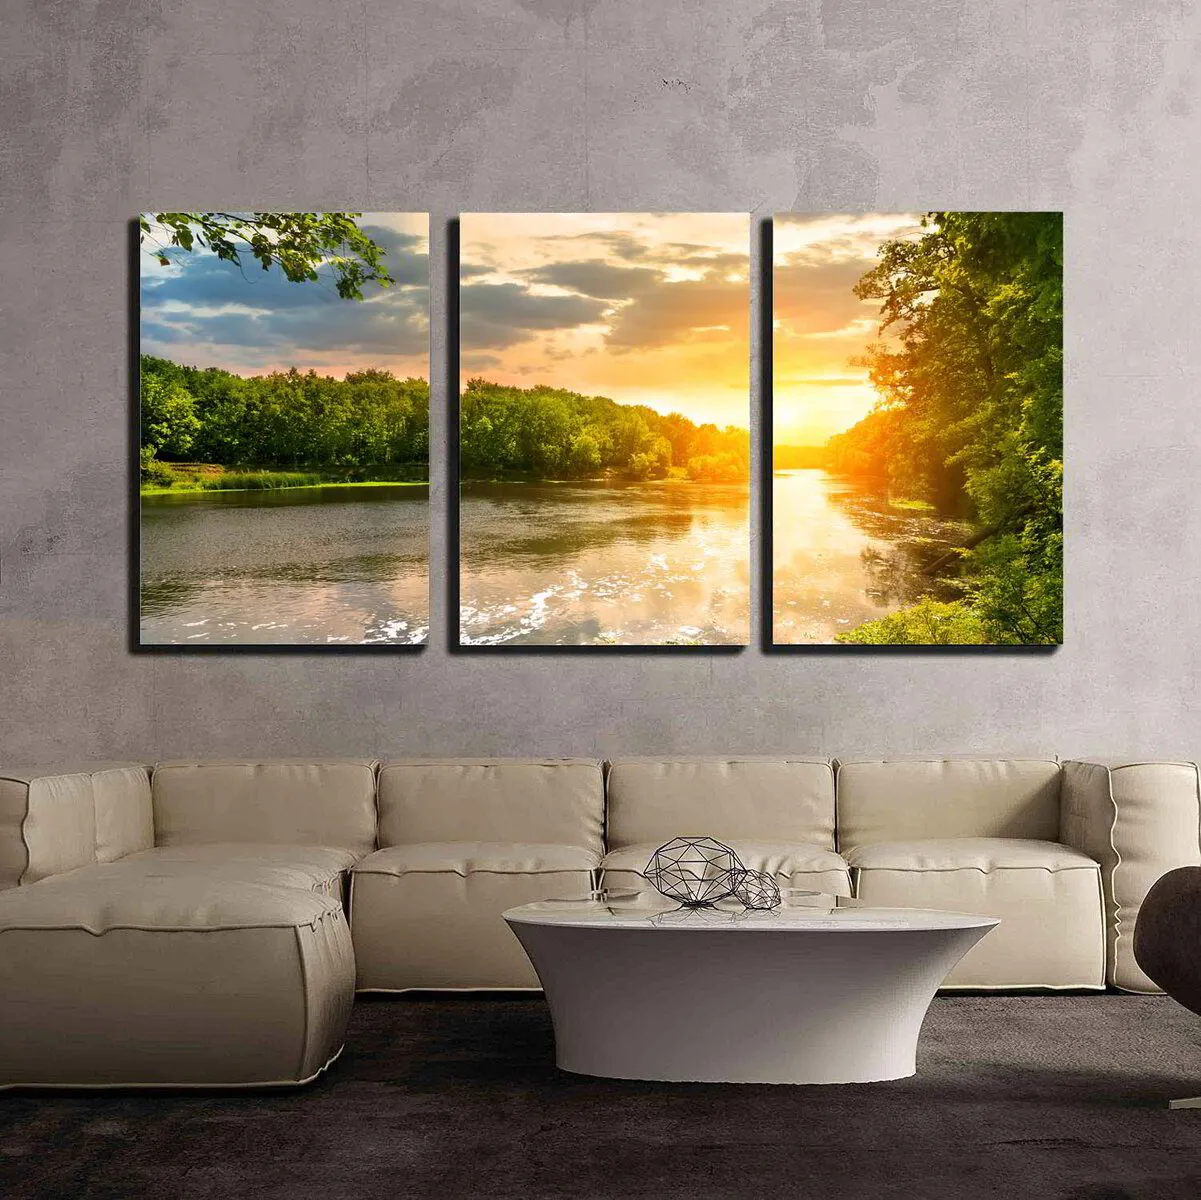 S3 Printed Acoustic Panels - Sunrise over wide river - 3 Panels